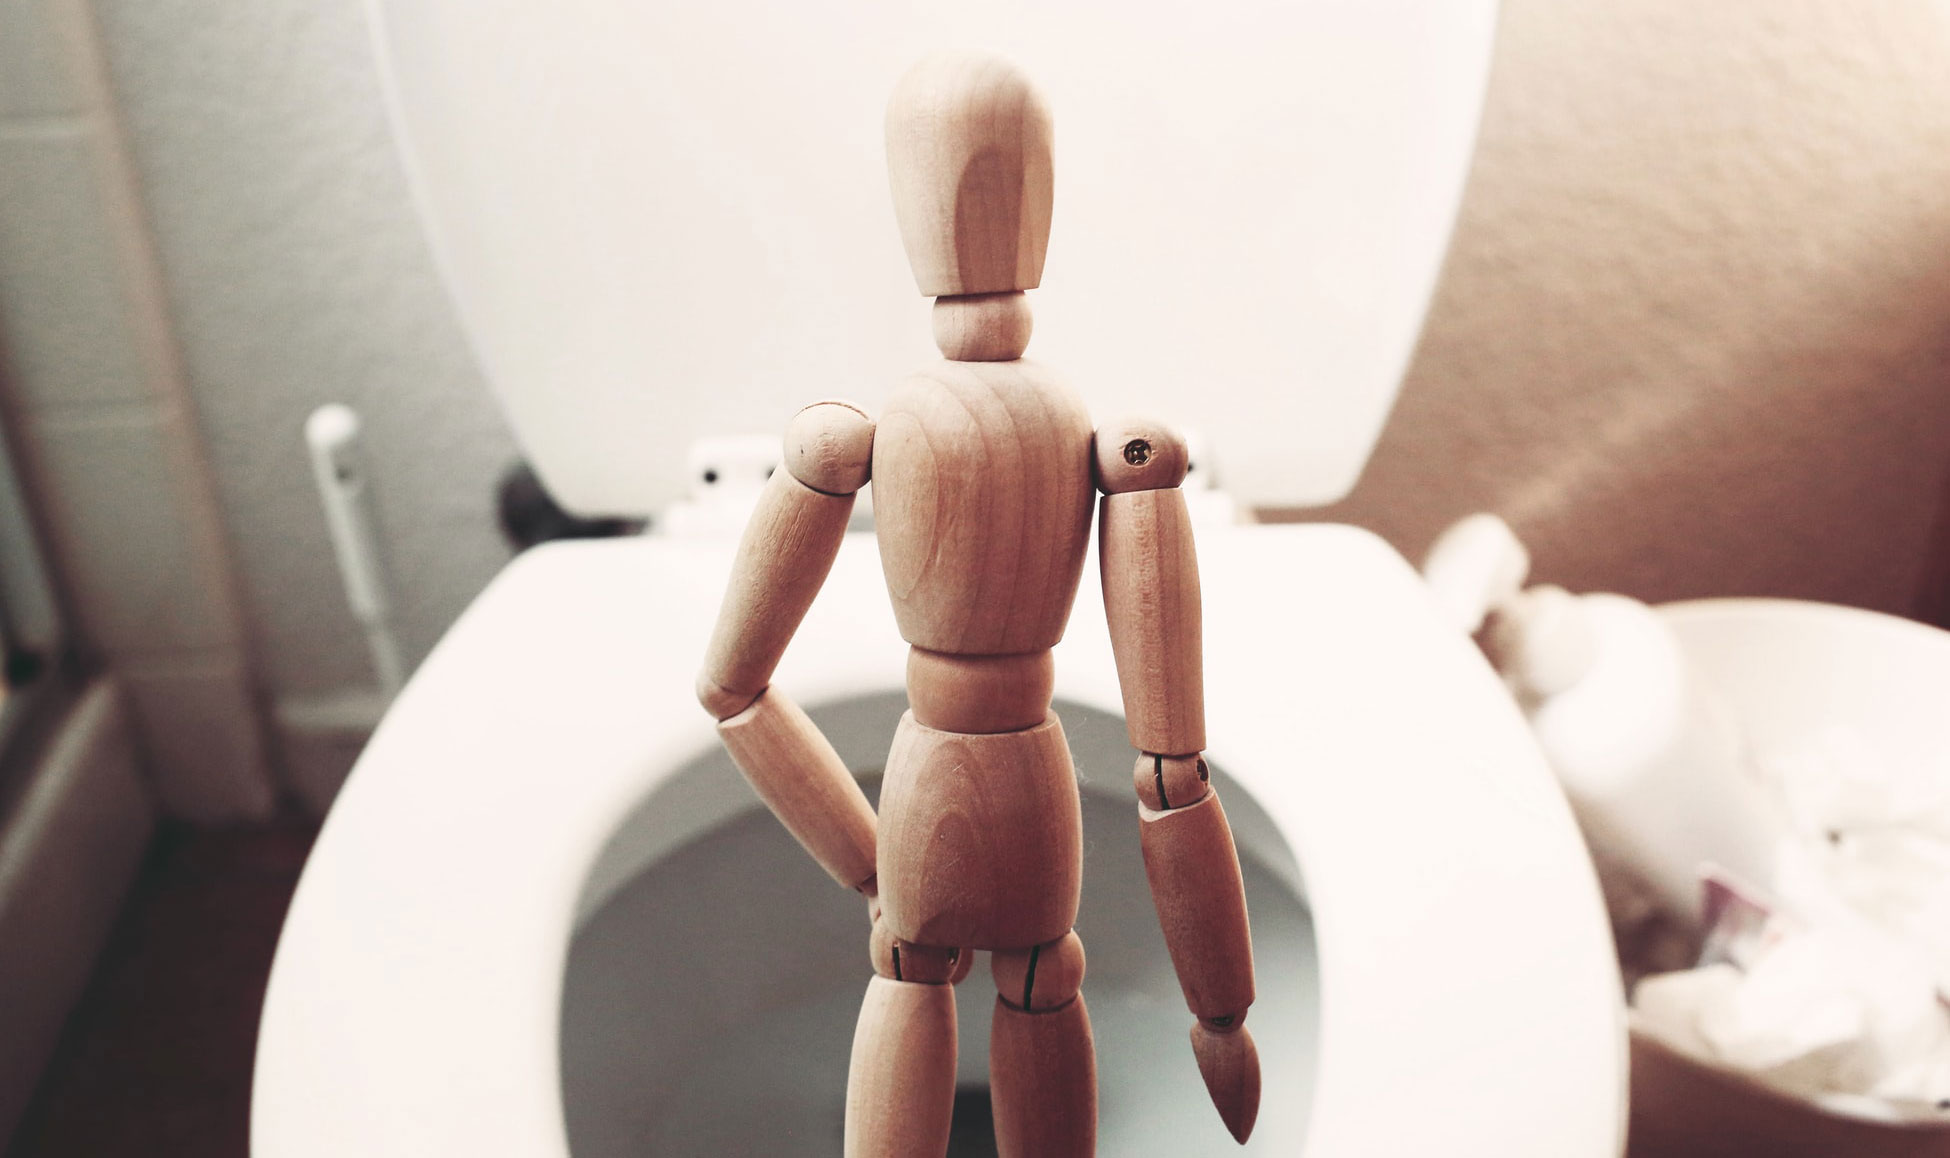 A figure staying in front of the toilet bowel feeling stuck suggesting constipation.